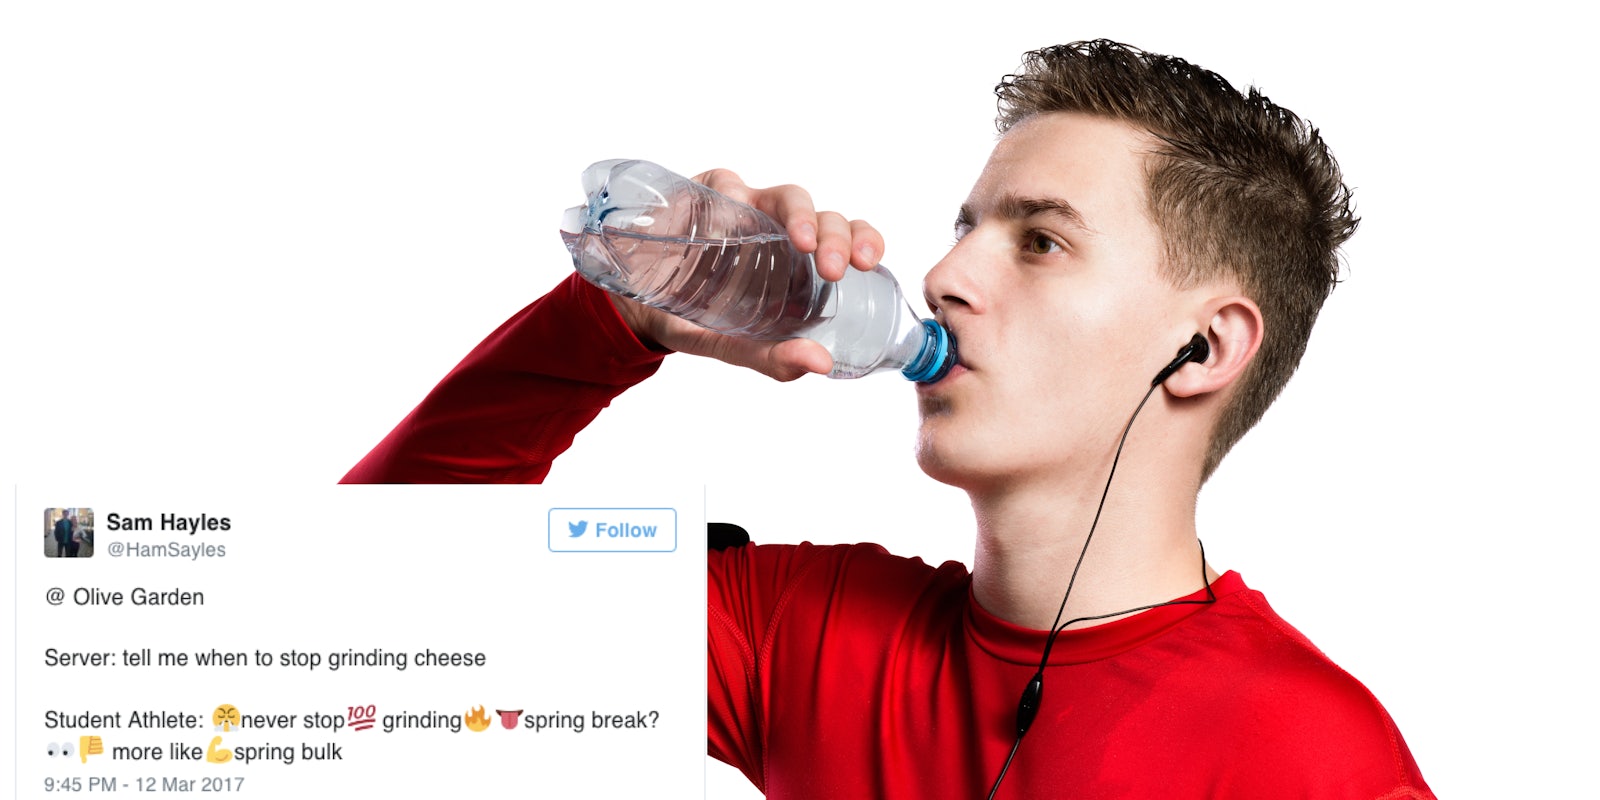 student athlete meme: teen drinking water after exercising